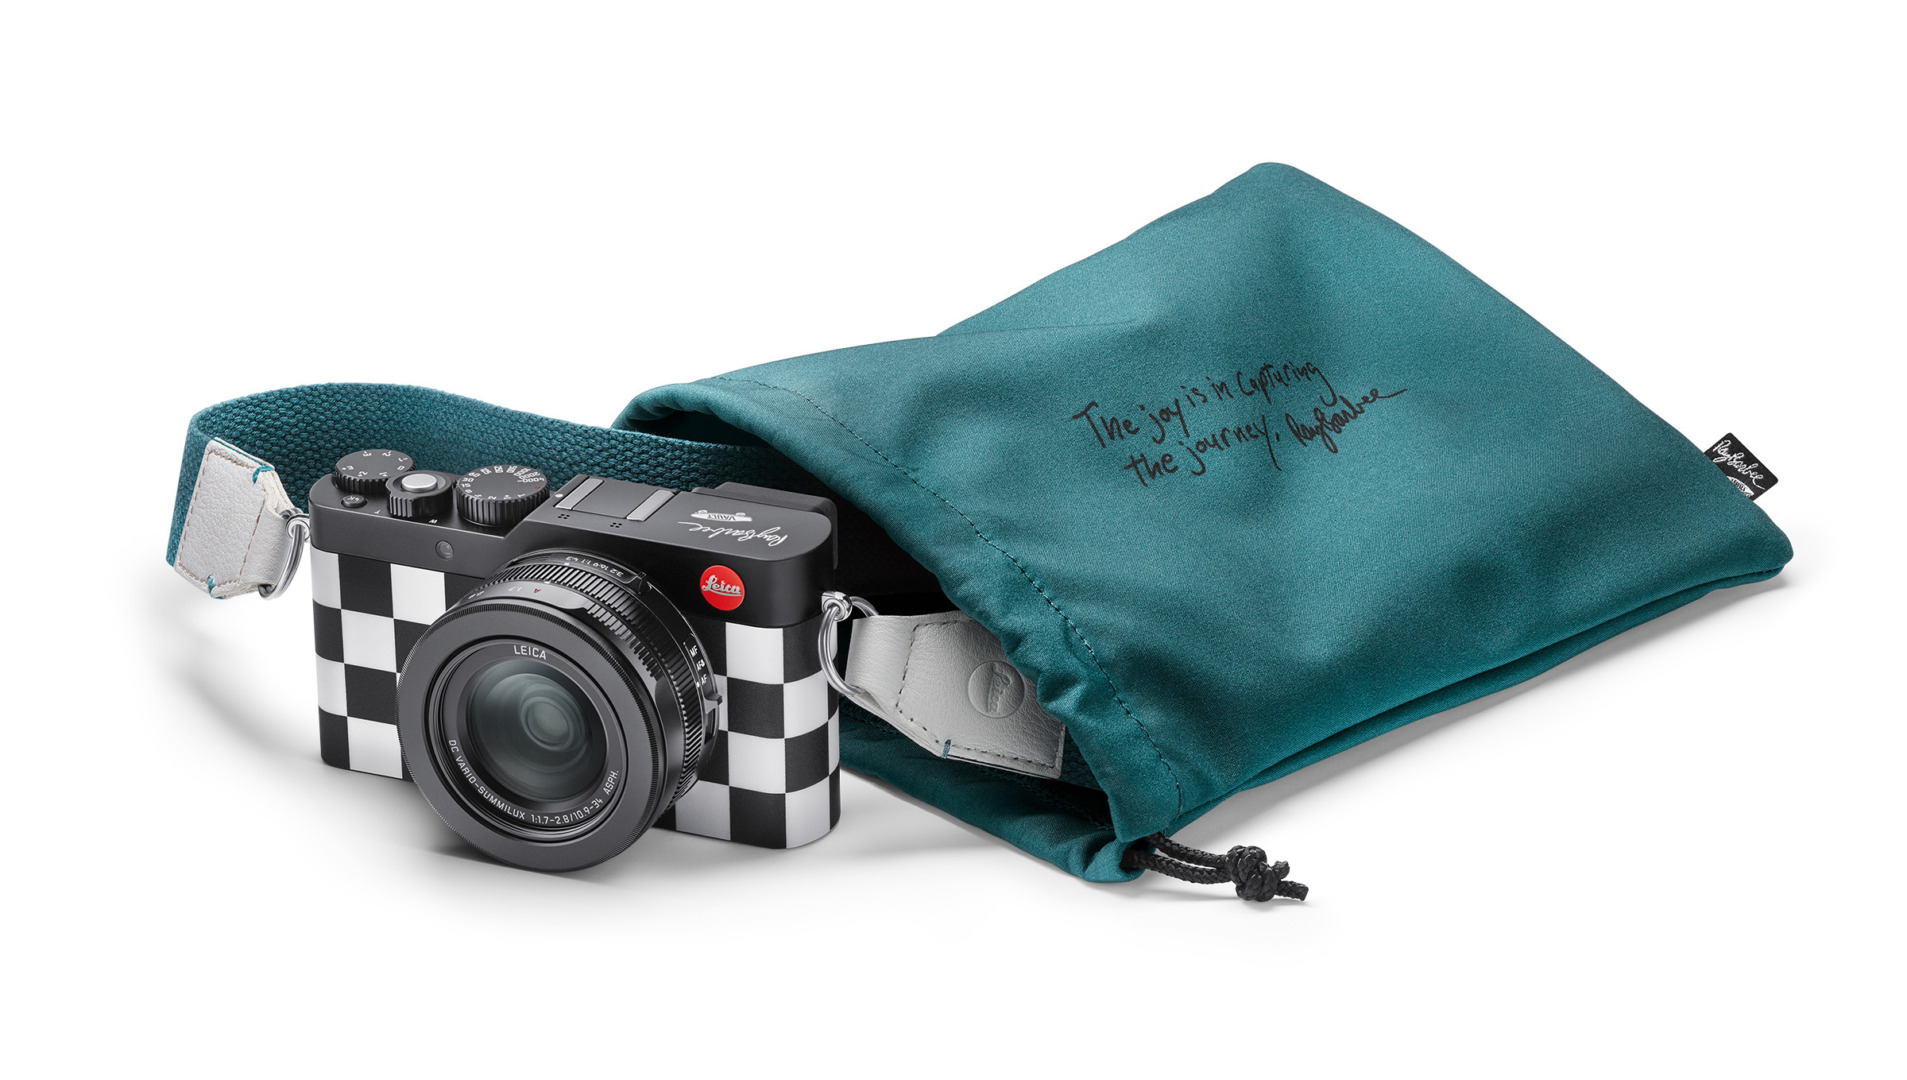 Leica D-Lux 7 and the x Ray Barbee edition - Macfilos